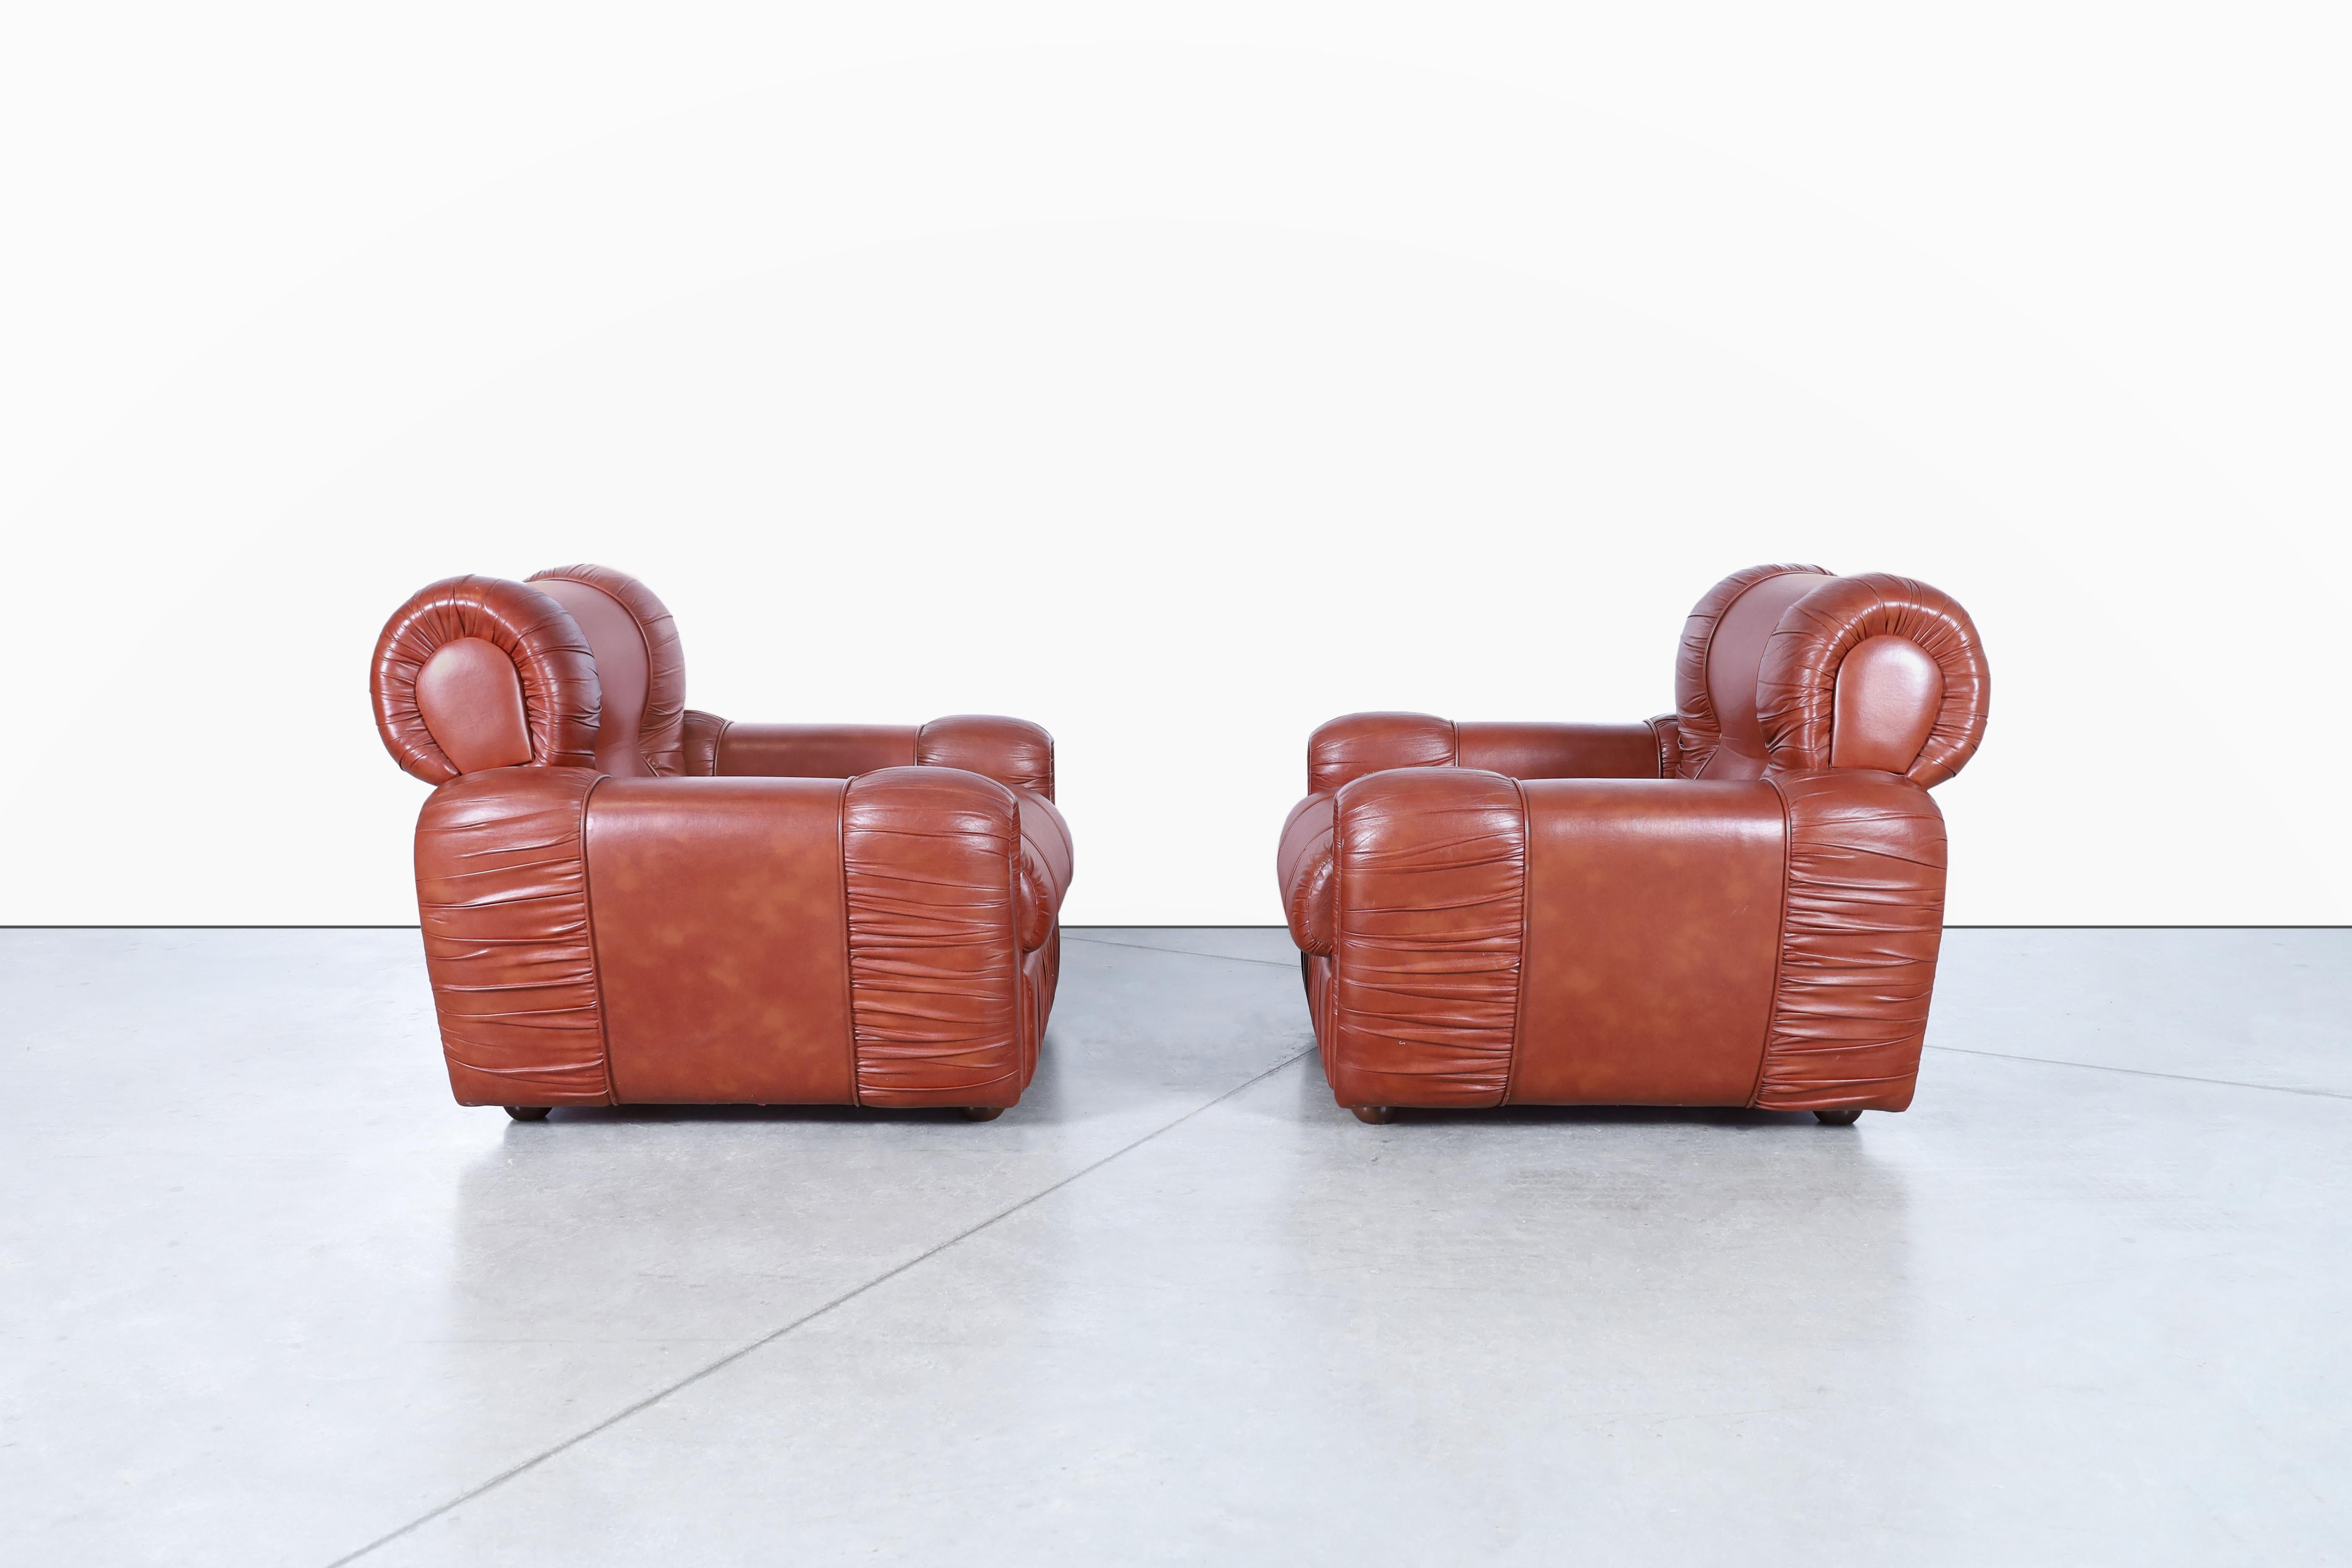 Vintage Italian Leatherette Lounge Chairs In Good Condition For Sale In North Hollywood, CA